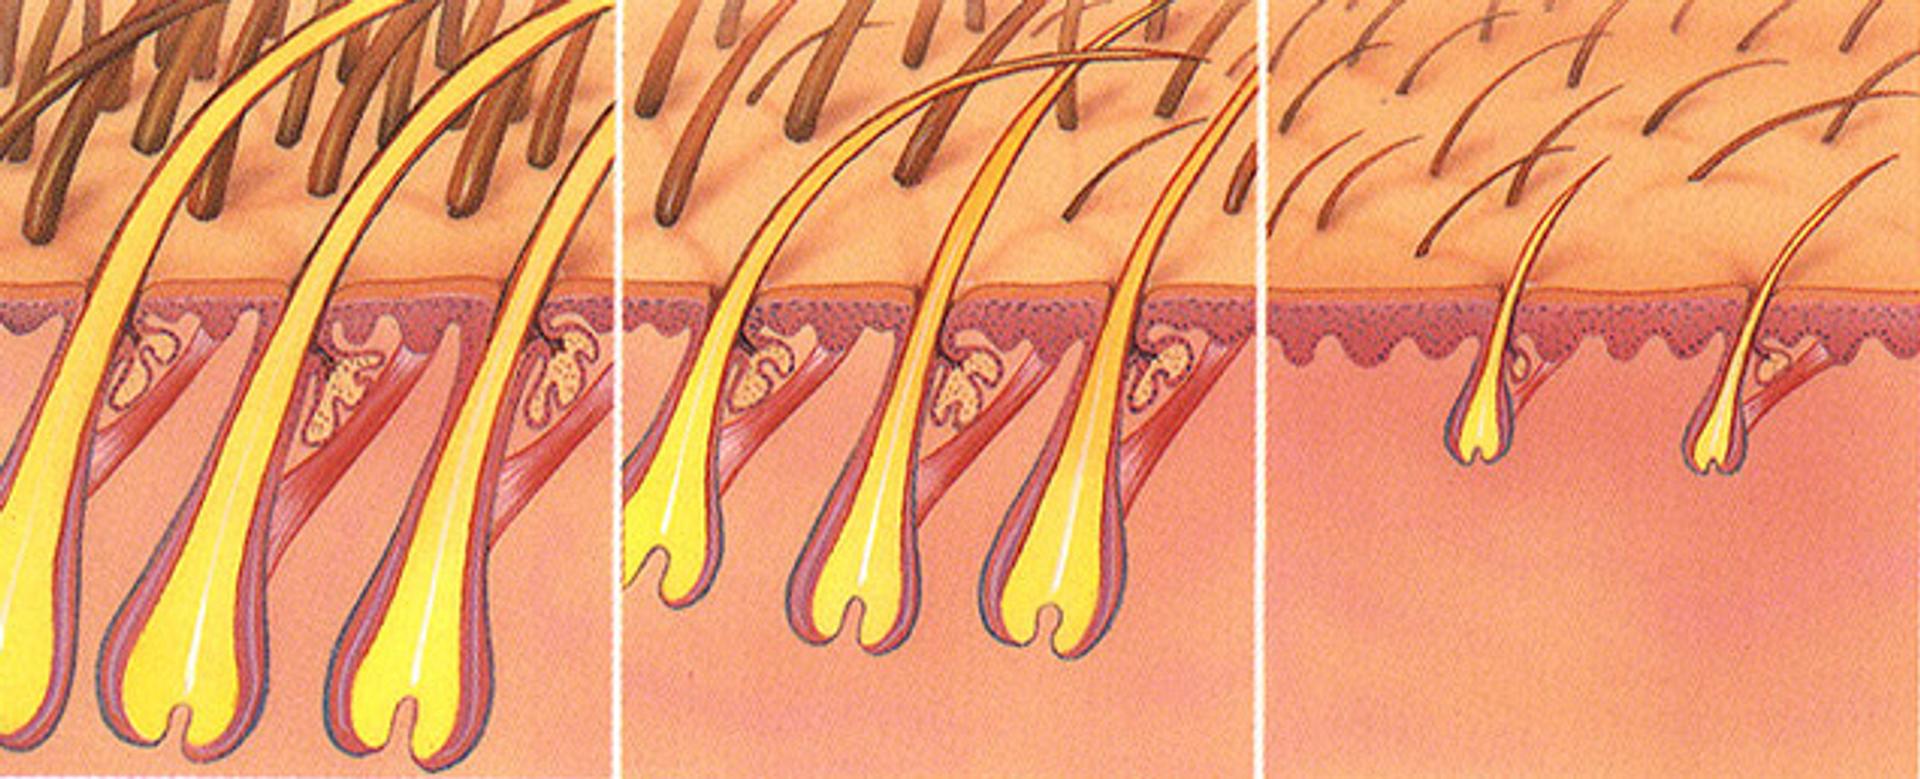 Hair folicles in different states of miniaturization